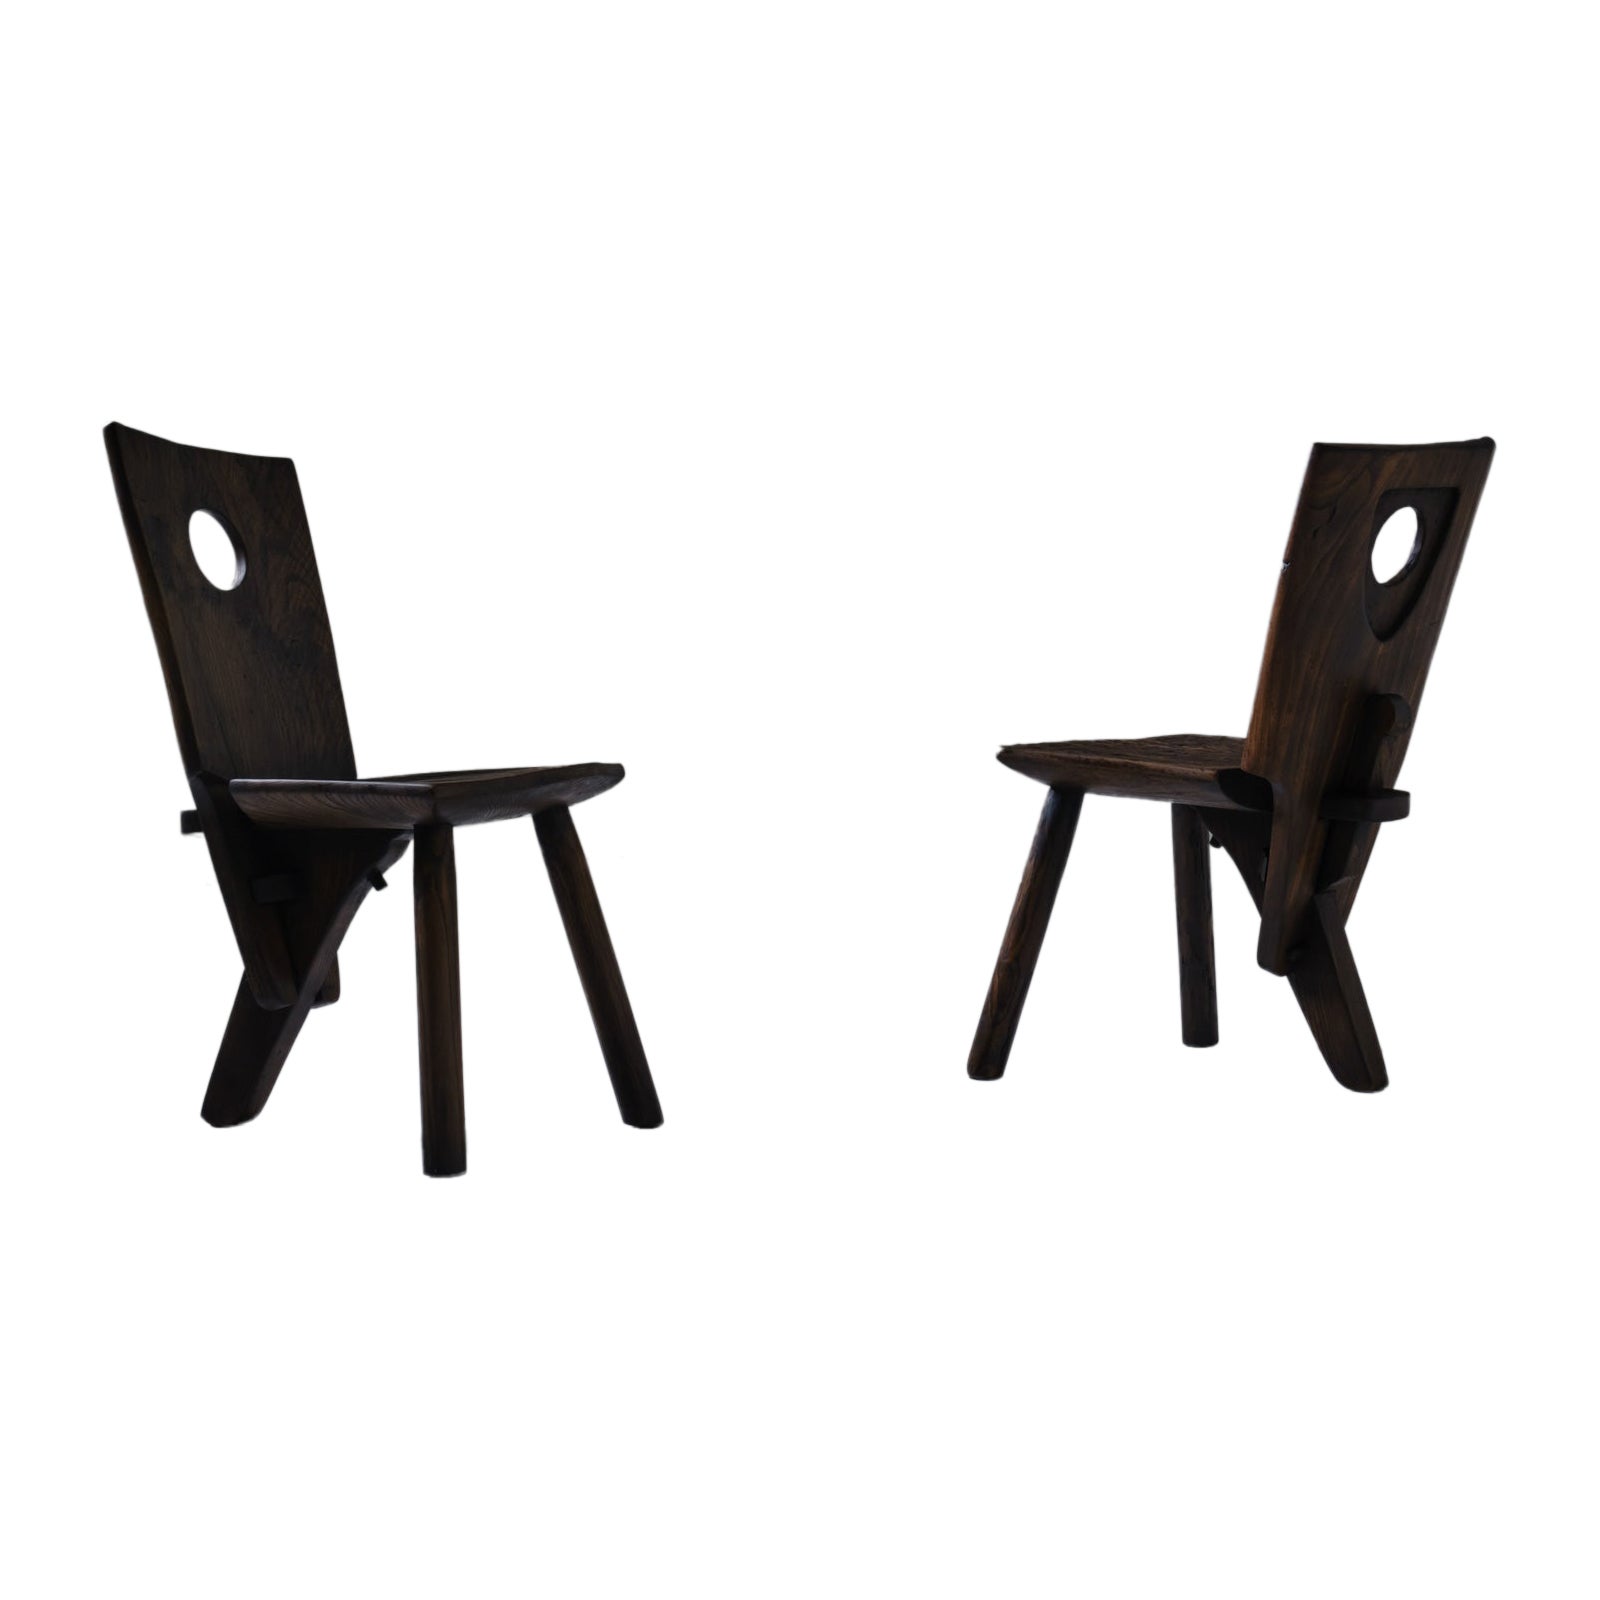 French Art Populaire Tripod Chairs, Set of Two For Sale